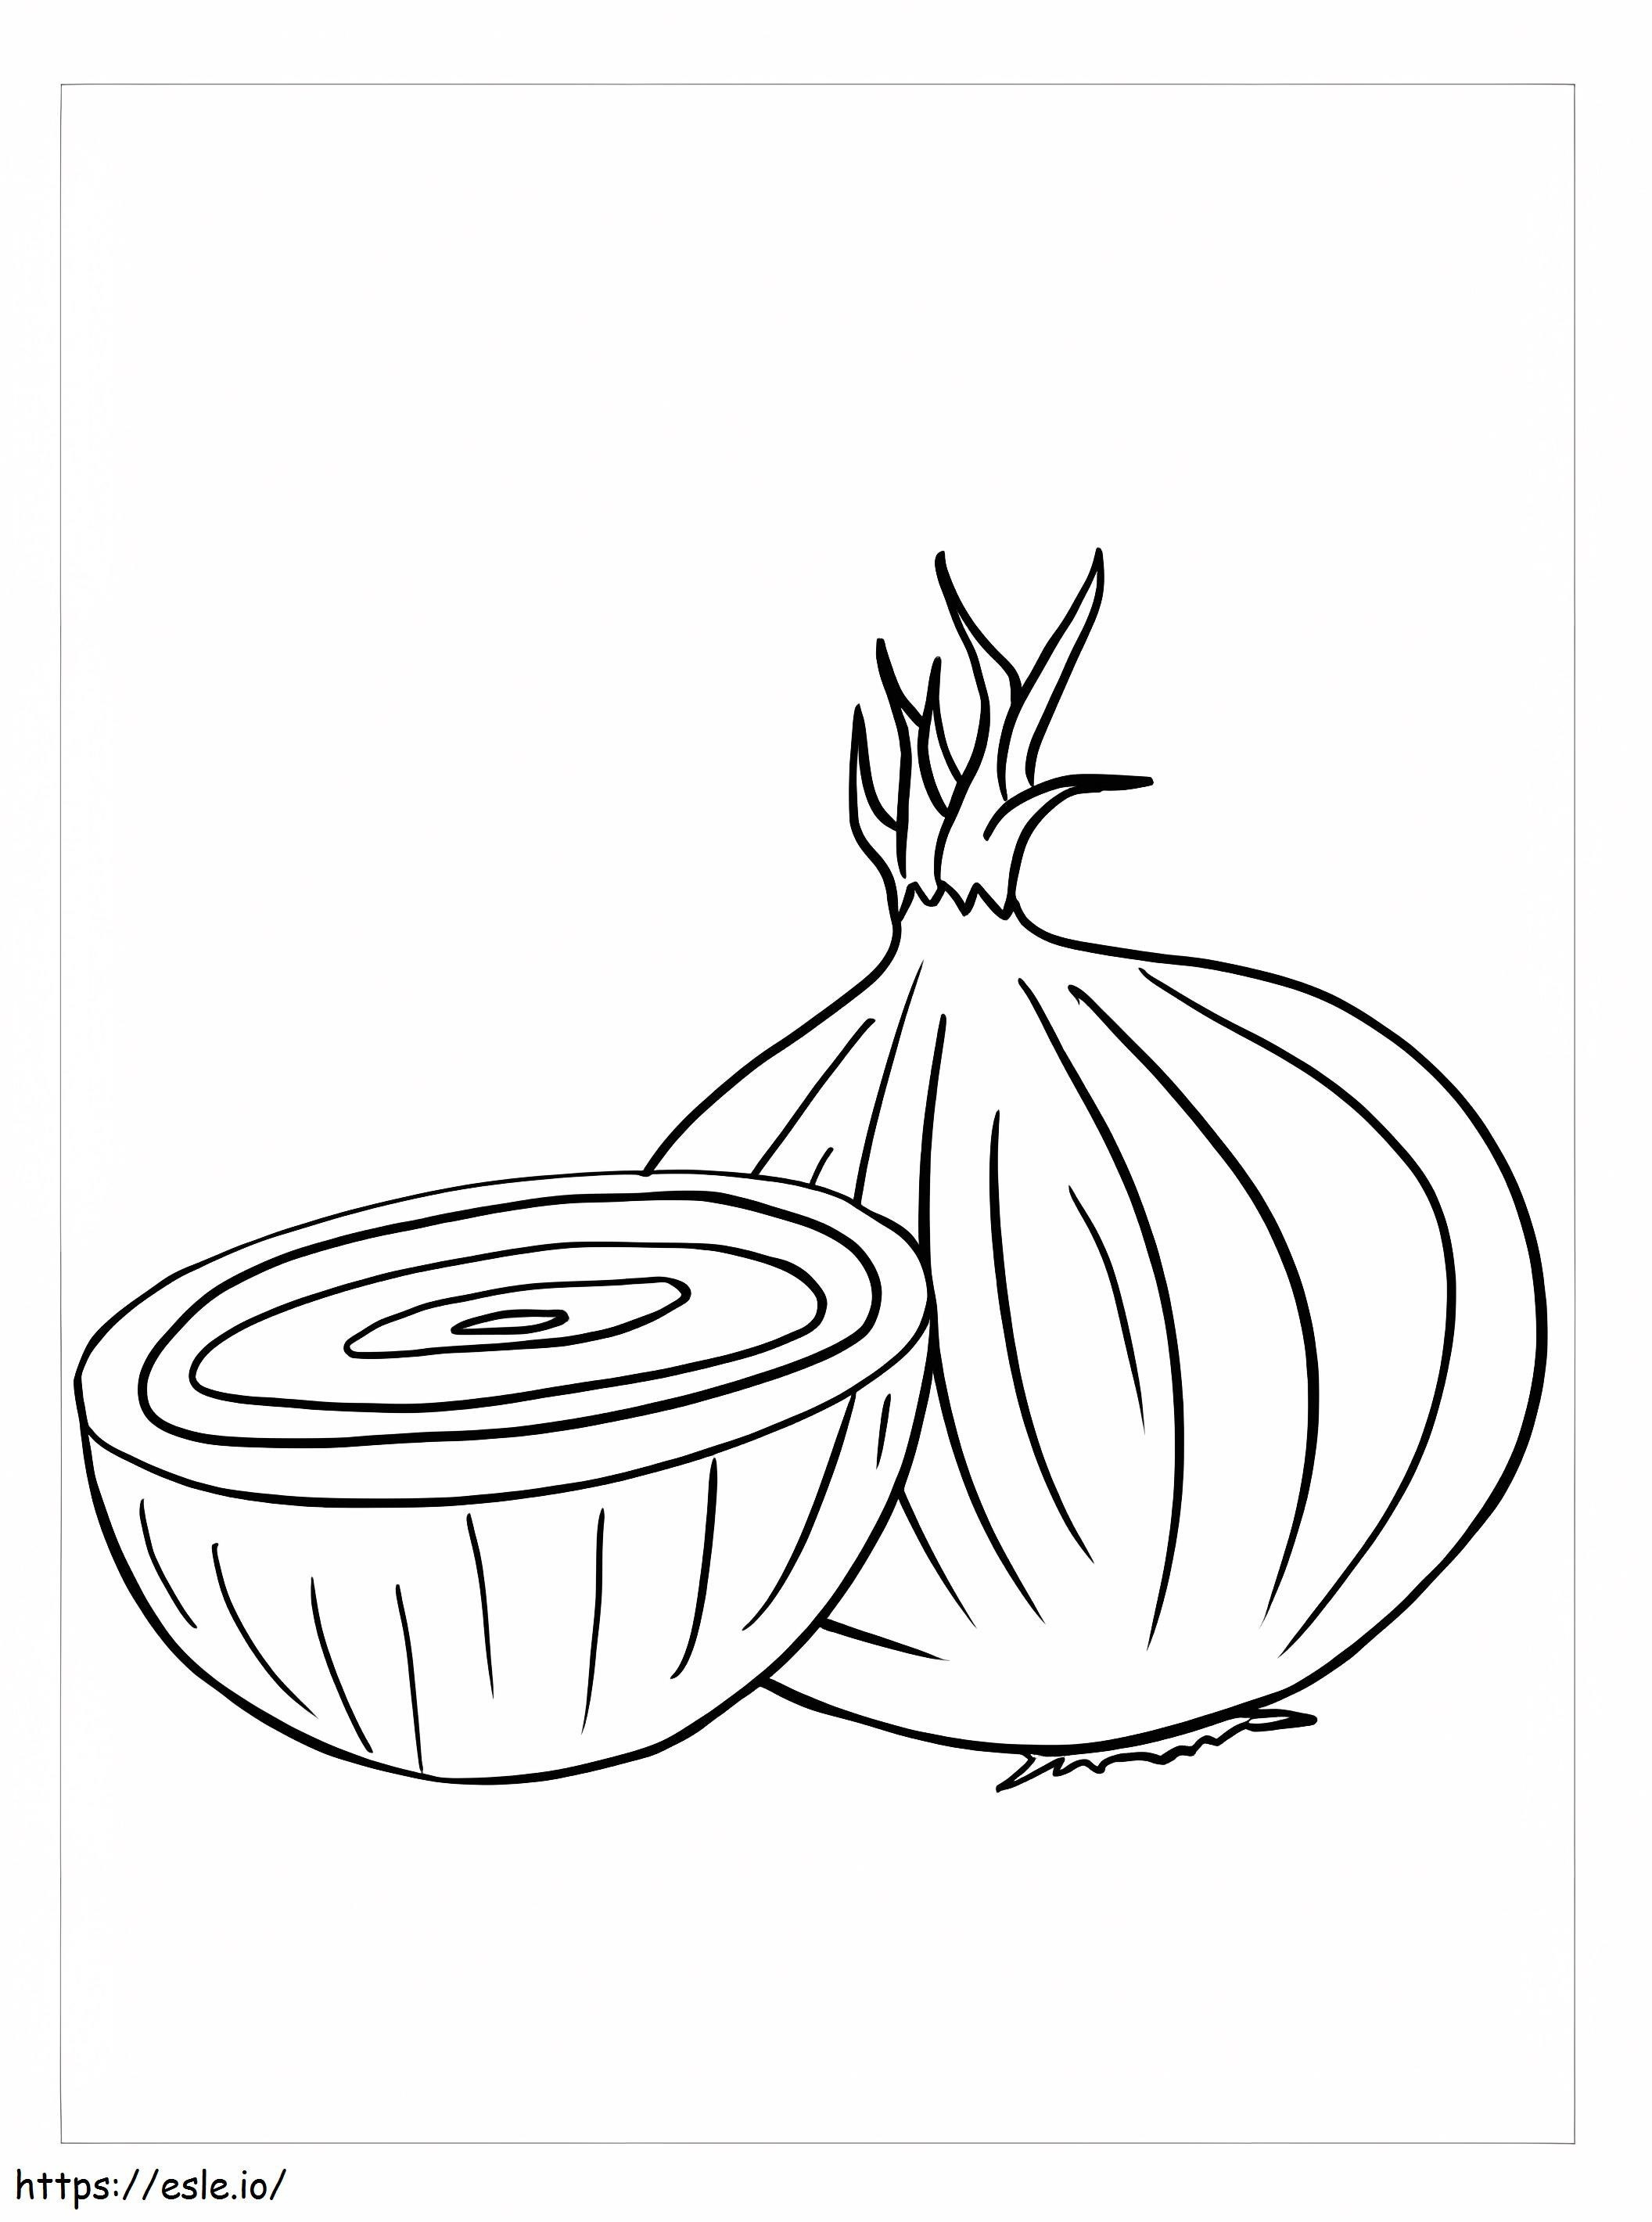 Basic One Onion And Half An Onion coloring page